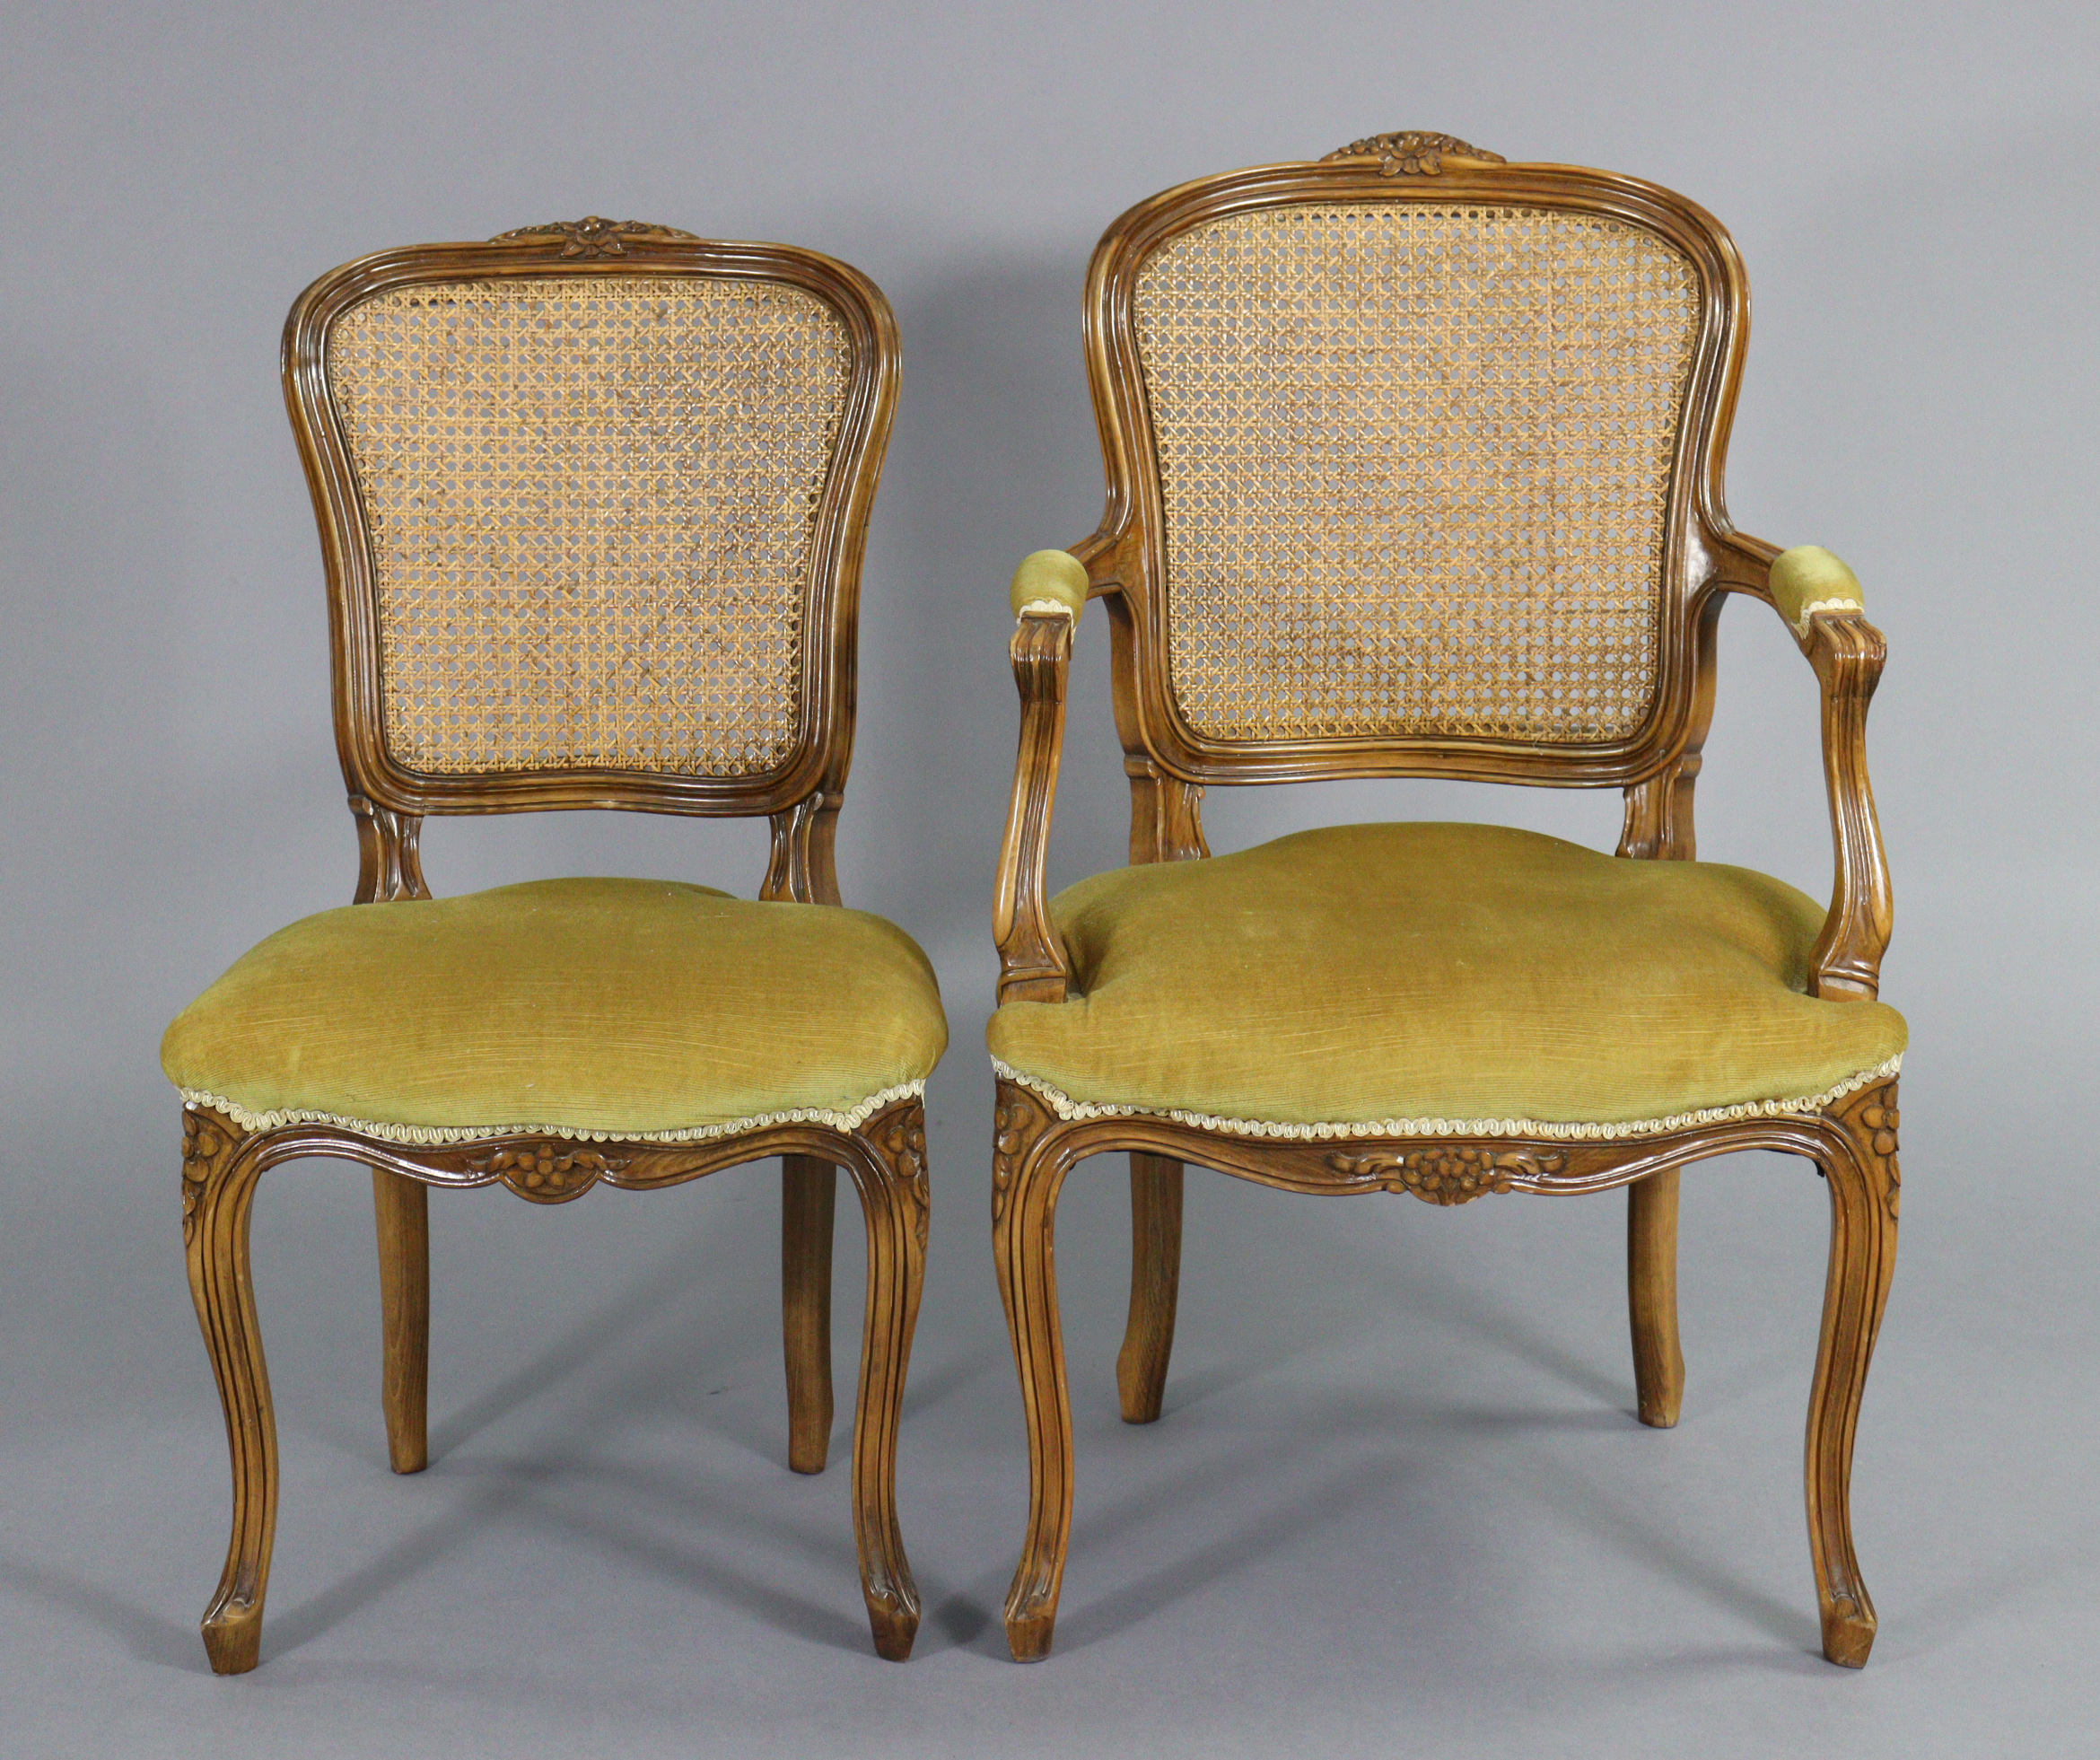 A MEUBLES FRANCAIS Ltd fauteuil in the 19th century style with cane back, padded seat & arms